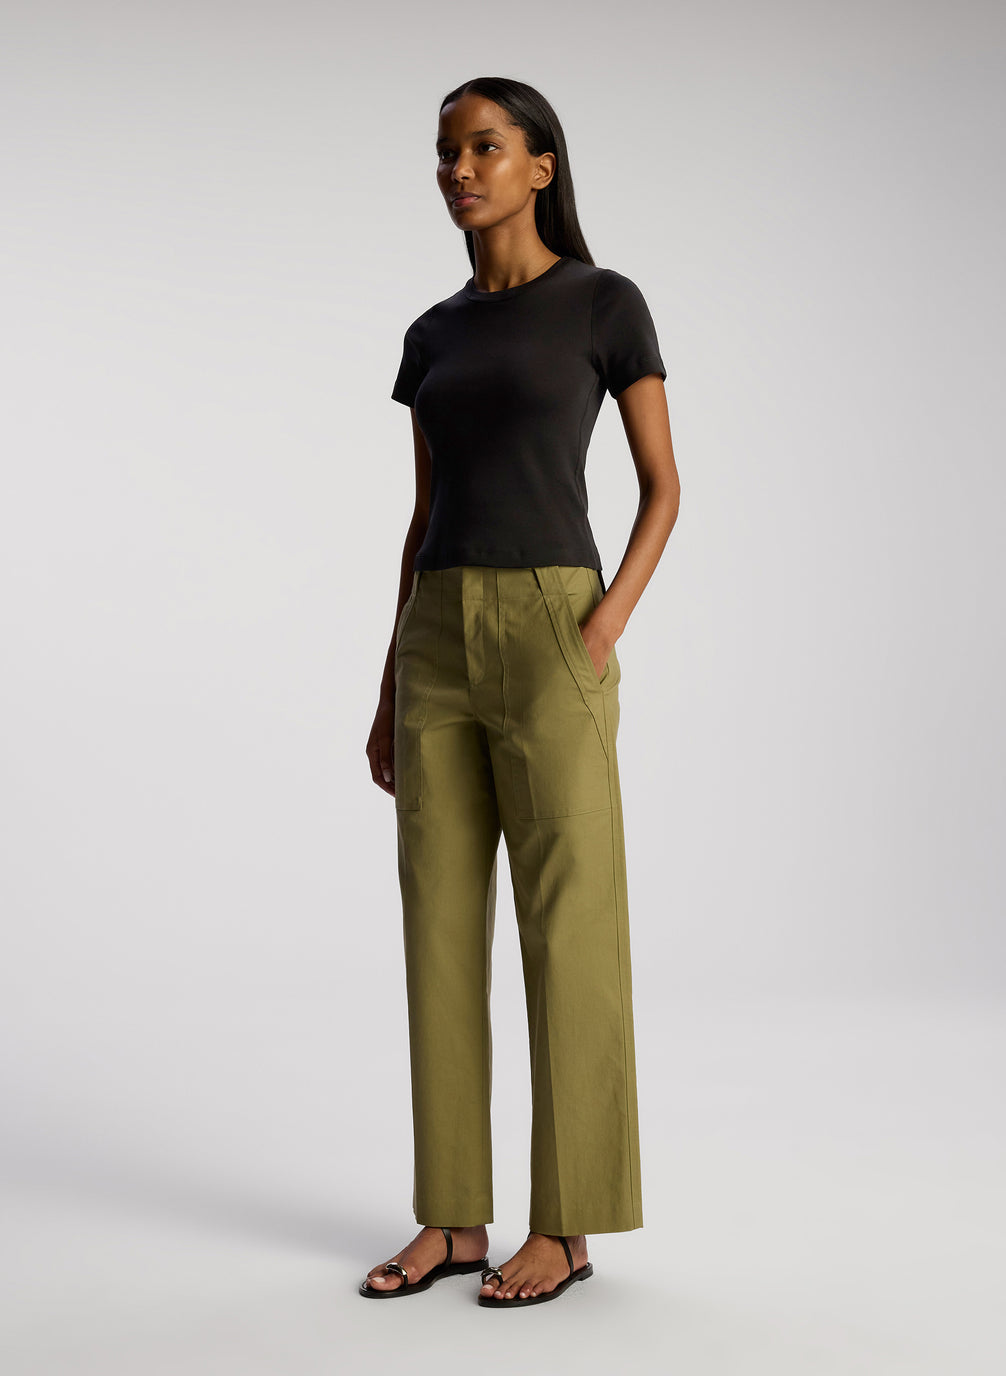 side view of woman wearing black tshirt and olive green pants